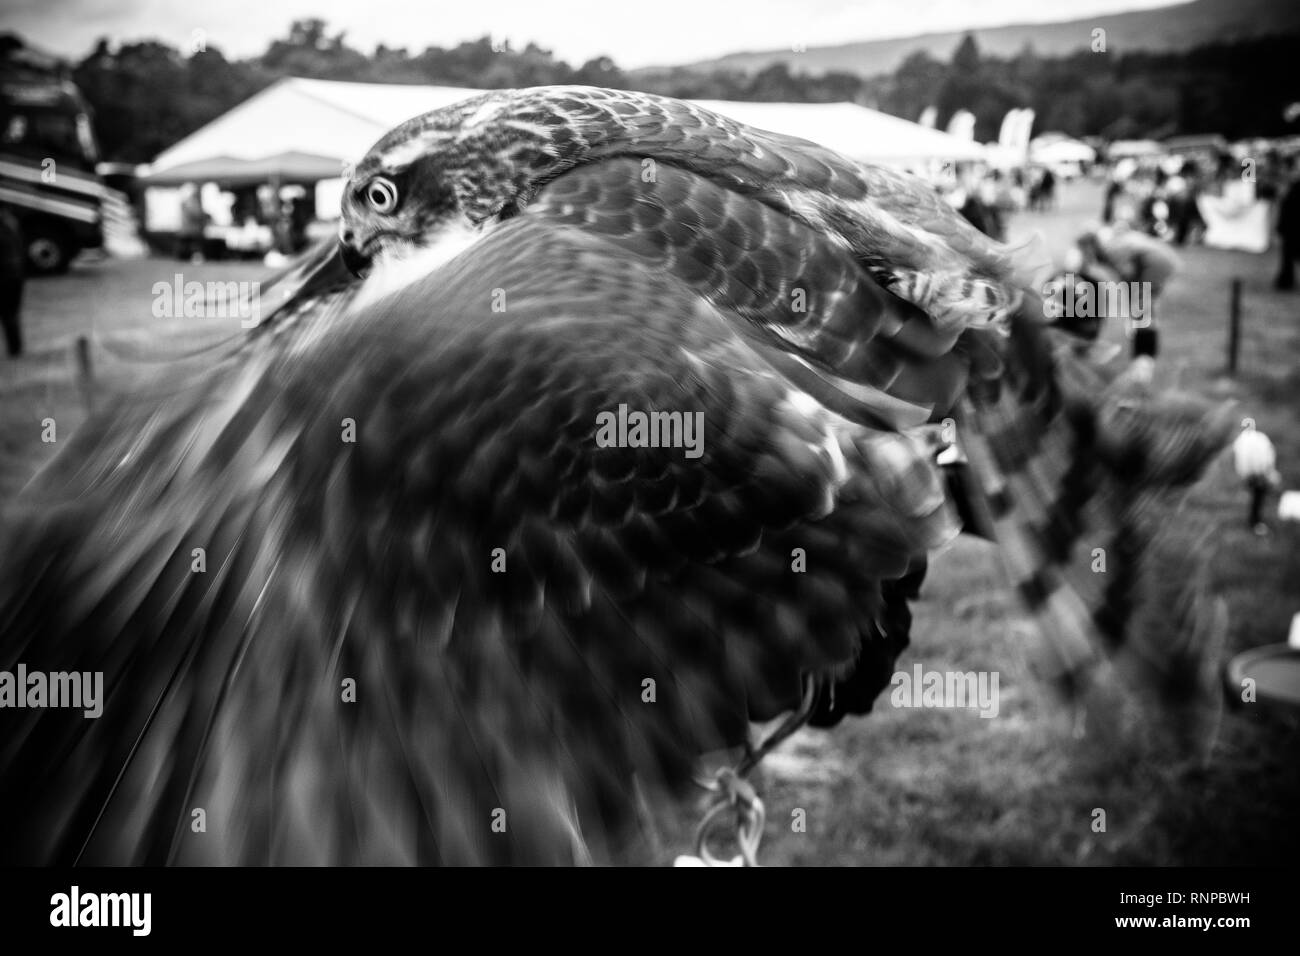 Close up view of bird of prey flapping its wings while on display at local show fete,Scottish Highlands Stock Photo